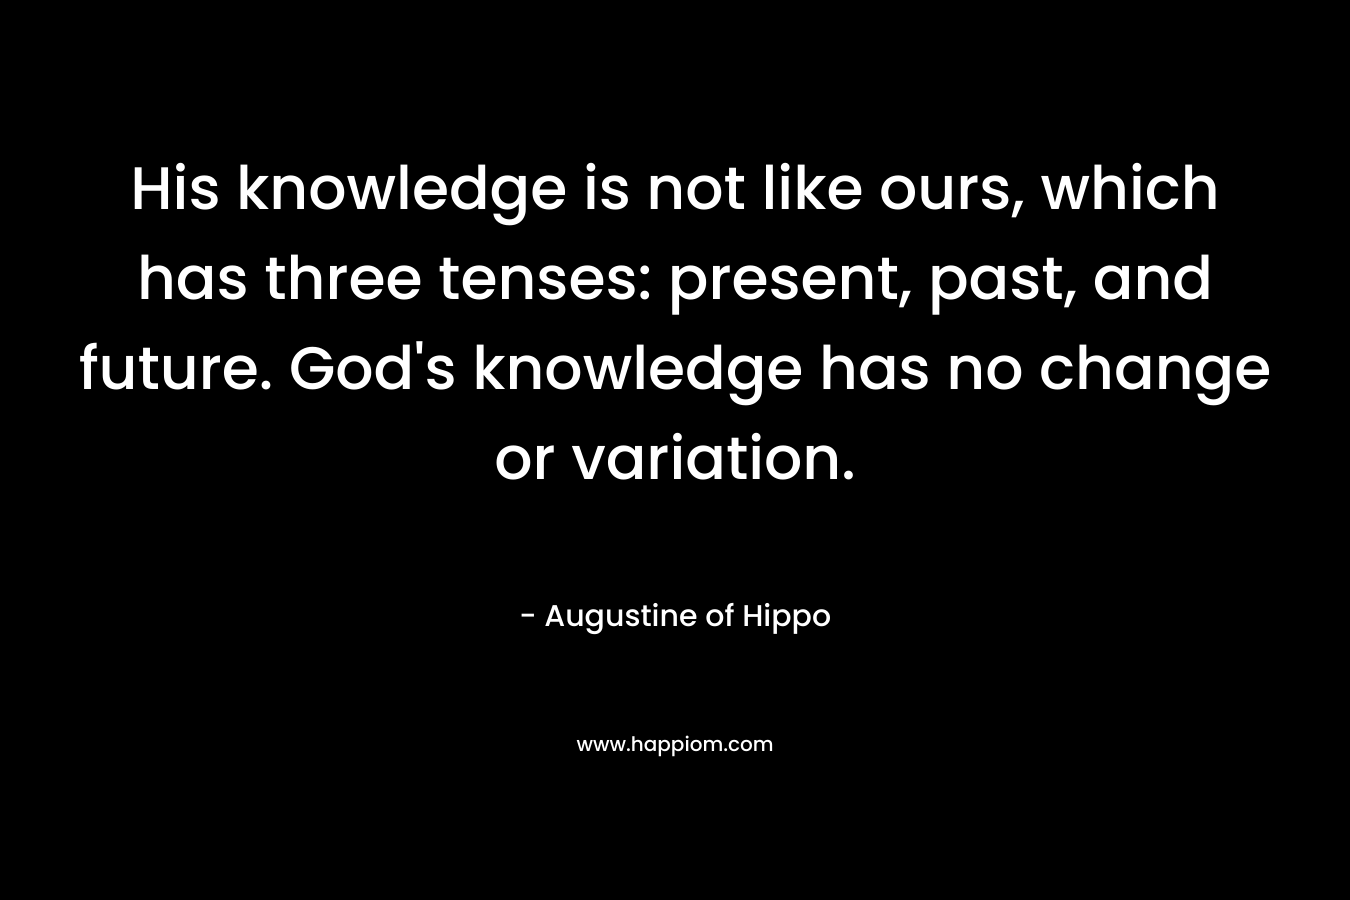 His knowledge is not like ours, which has three tenses: present, past, and future. God’s knowledge has no change or variation. – Augustine of Hippo